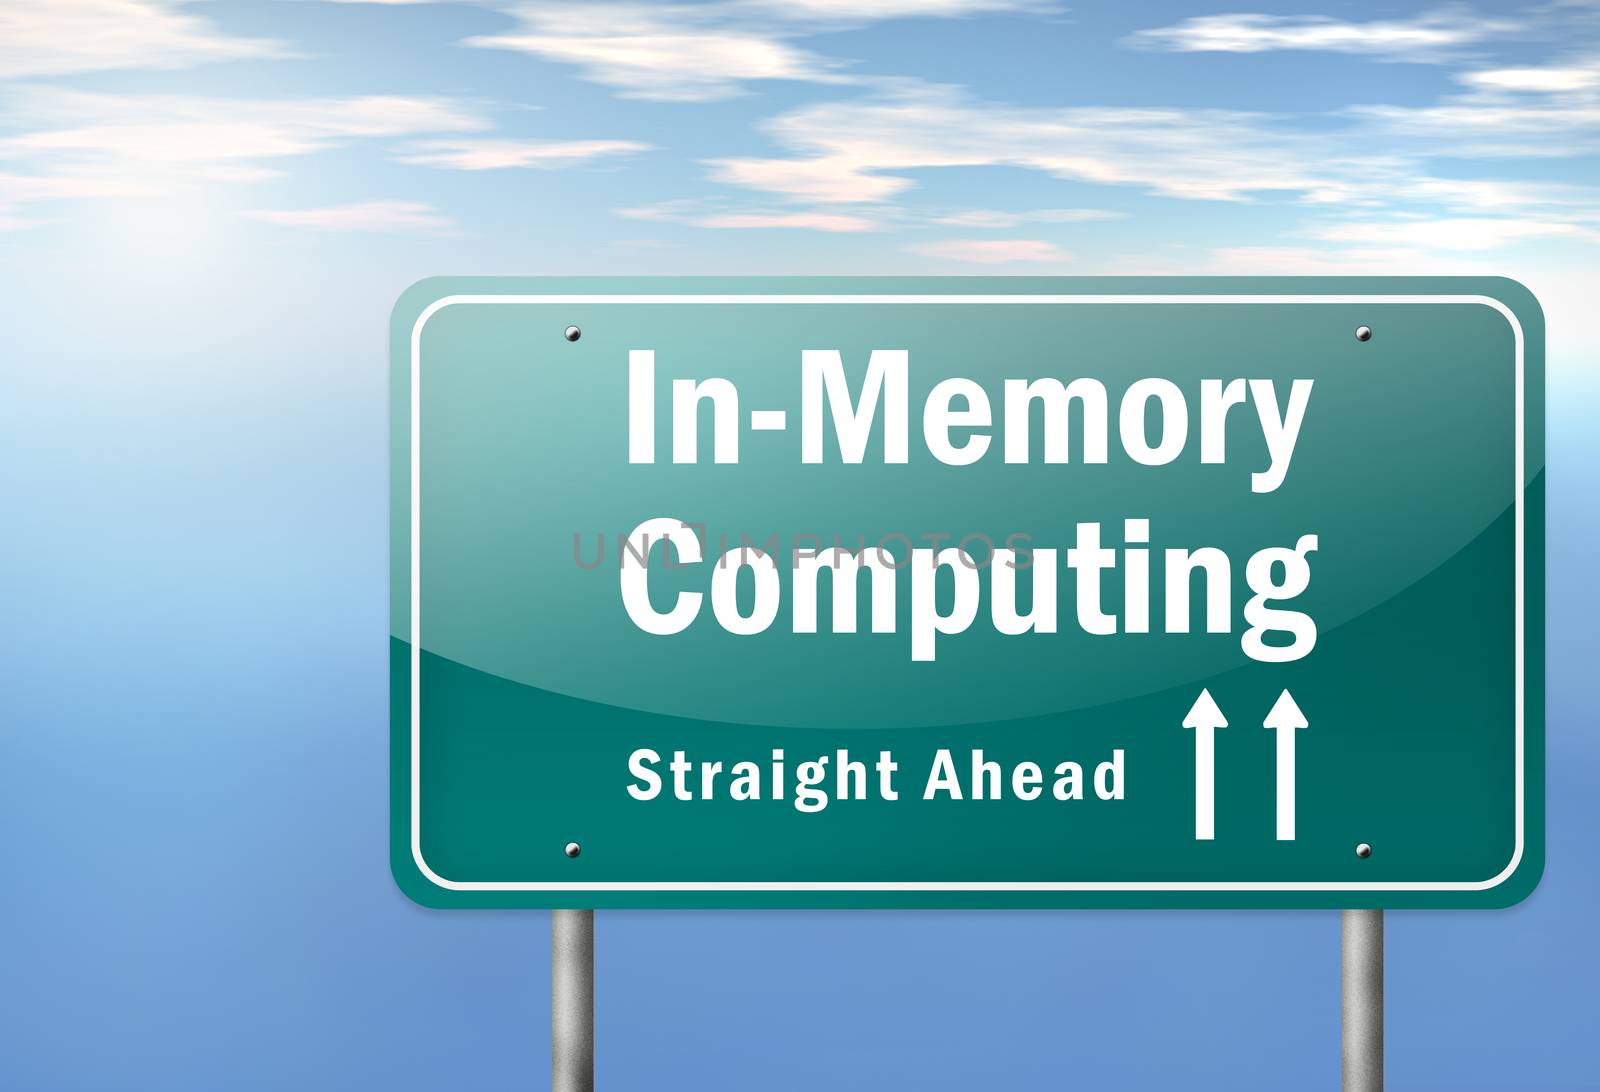 Highway Signpost In-Memory Computing by mindscanner